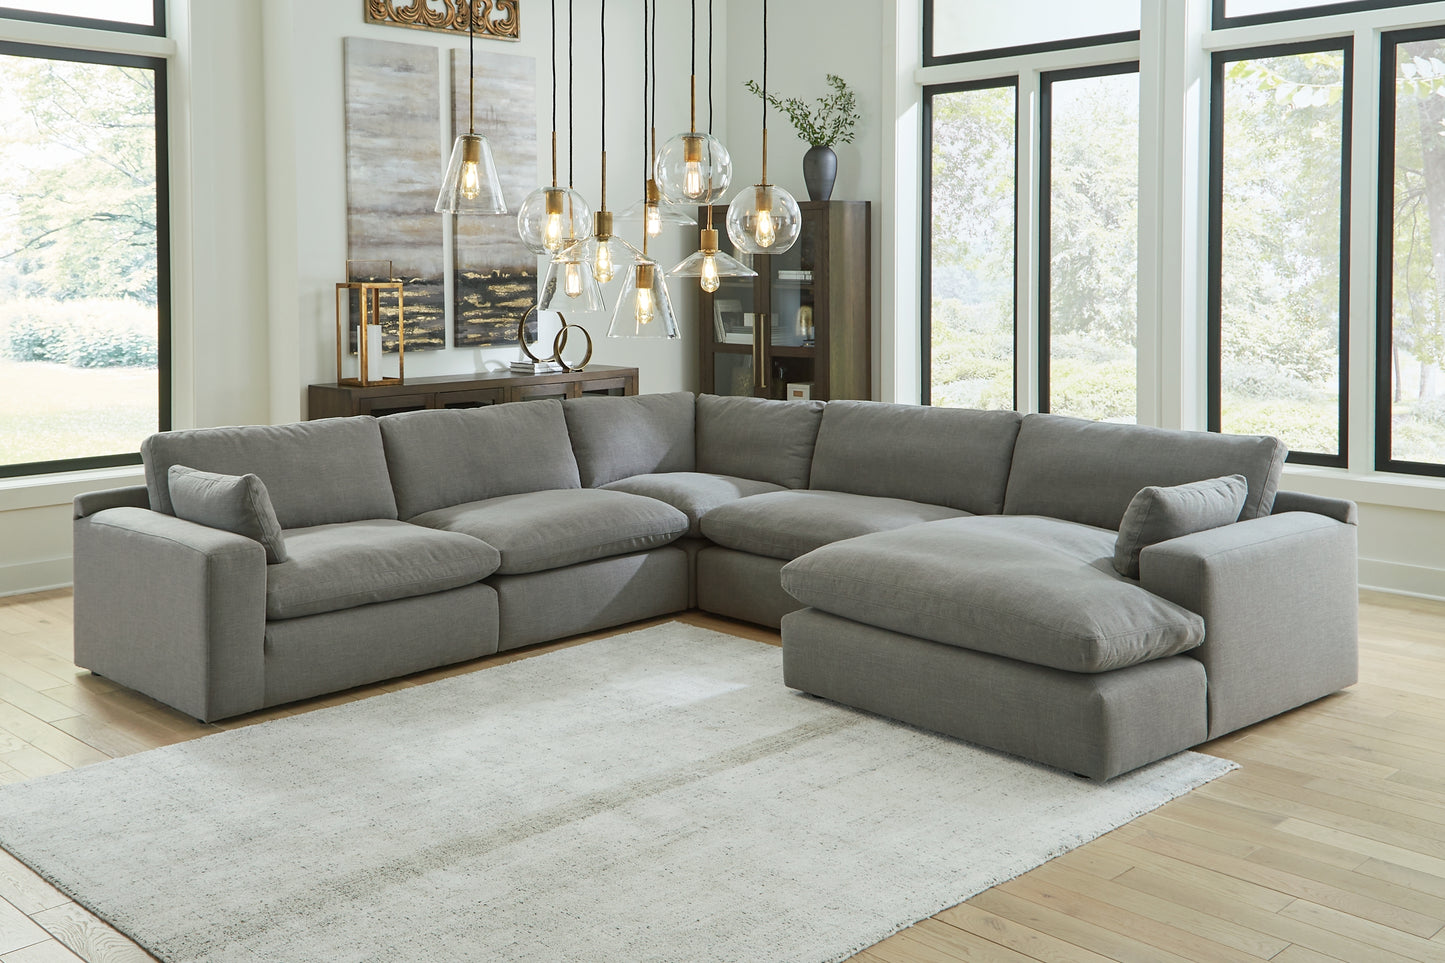 Elyza 5-Piece Sectional with Chaise Wilson Furniture (OH)  in Bridgeport, Ohio. Serving Bridgeport, Yorkville, Bellaire, & Avondale